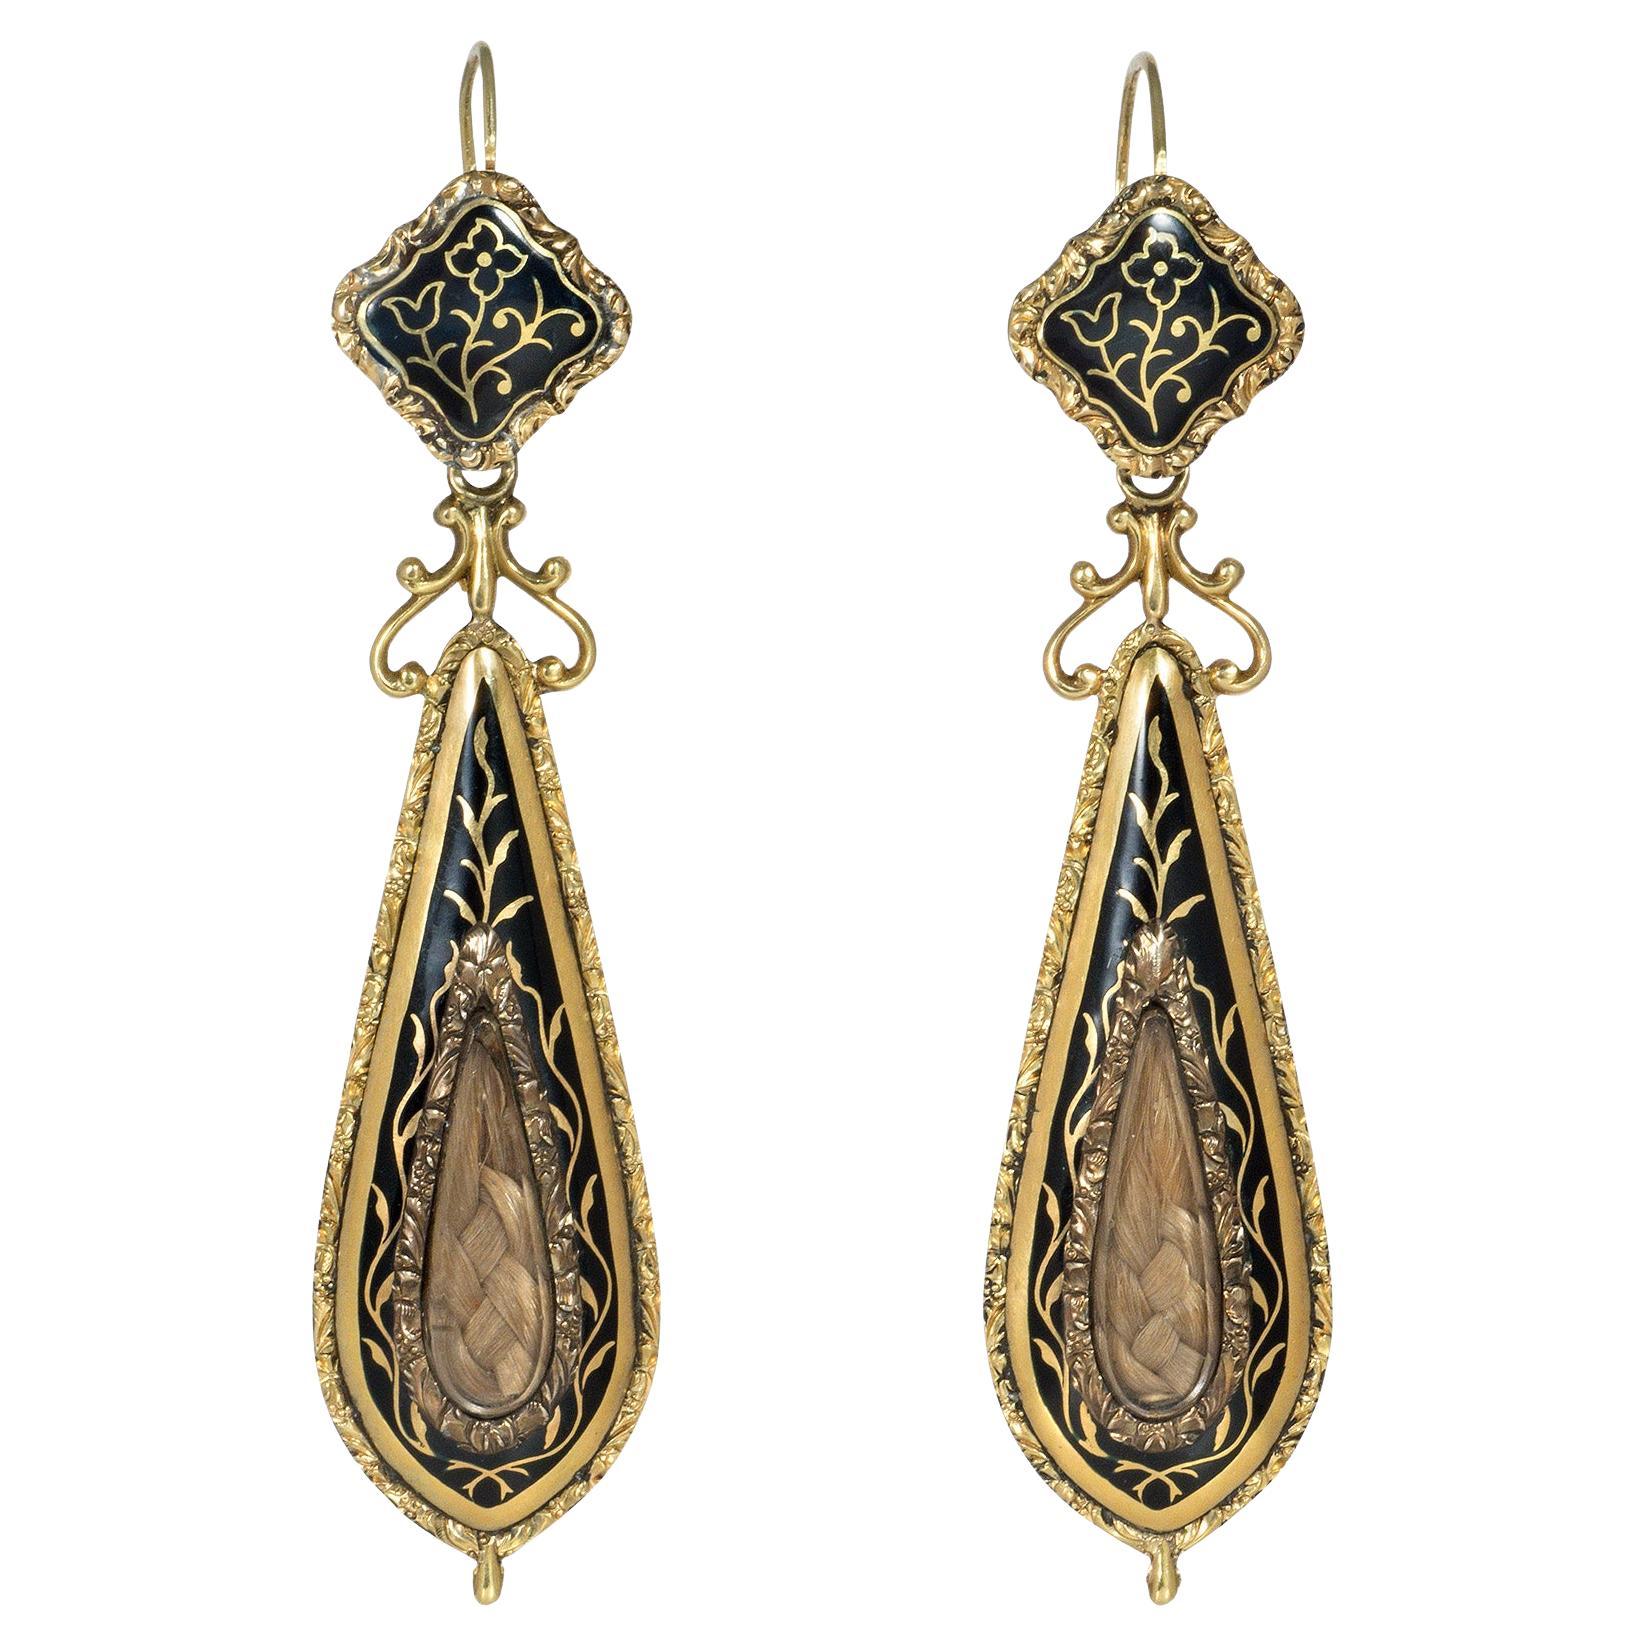 Antique Georgian Gold and Black Enamel Day-to-Night Mourning Earrings